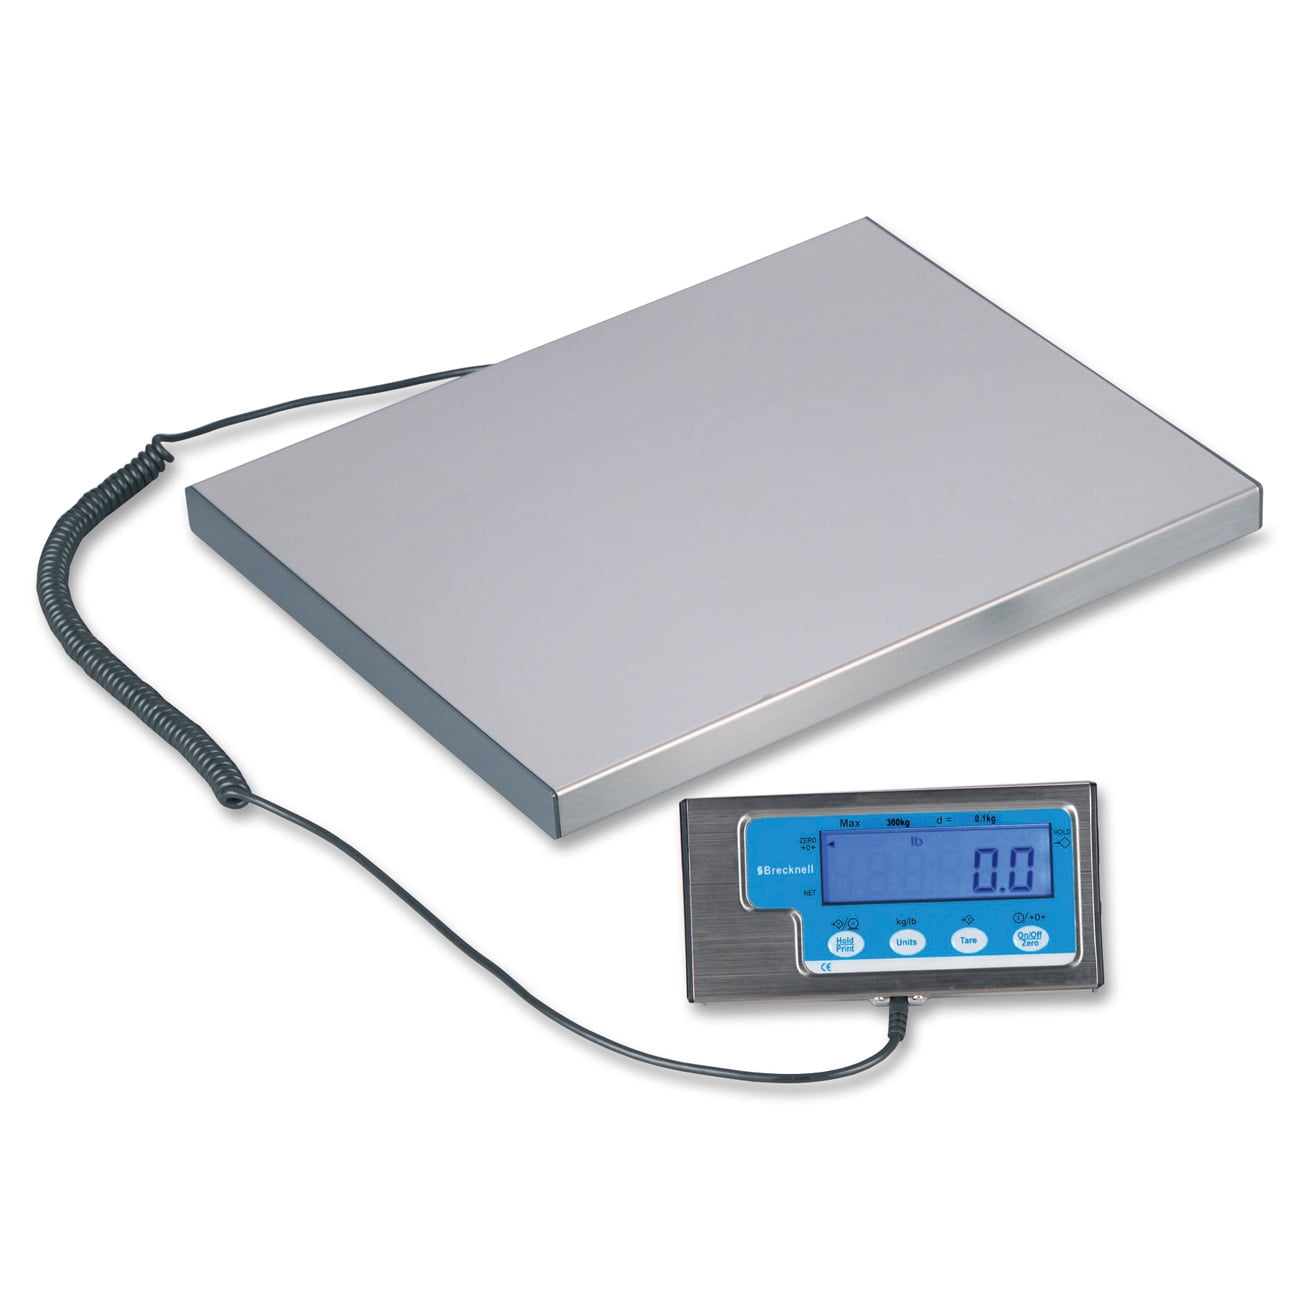 NTEP Approved Stainless Steel Postal Floor Scale for Warehouse 600 LB Capacity Brecknell Heavy Duty Industrial Digital Shipping Bench Scale 